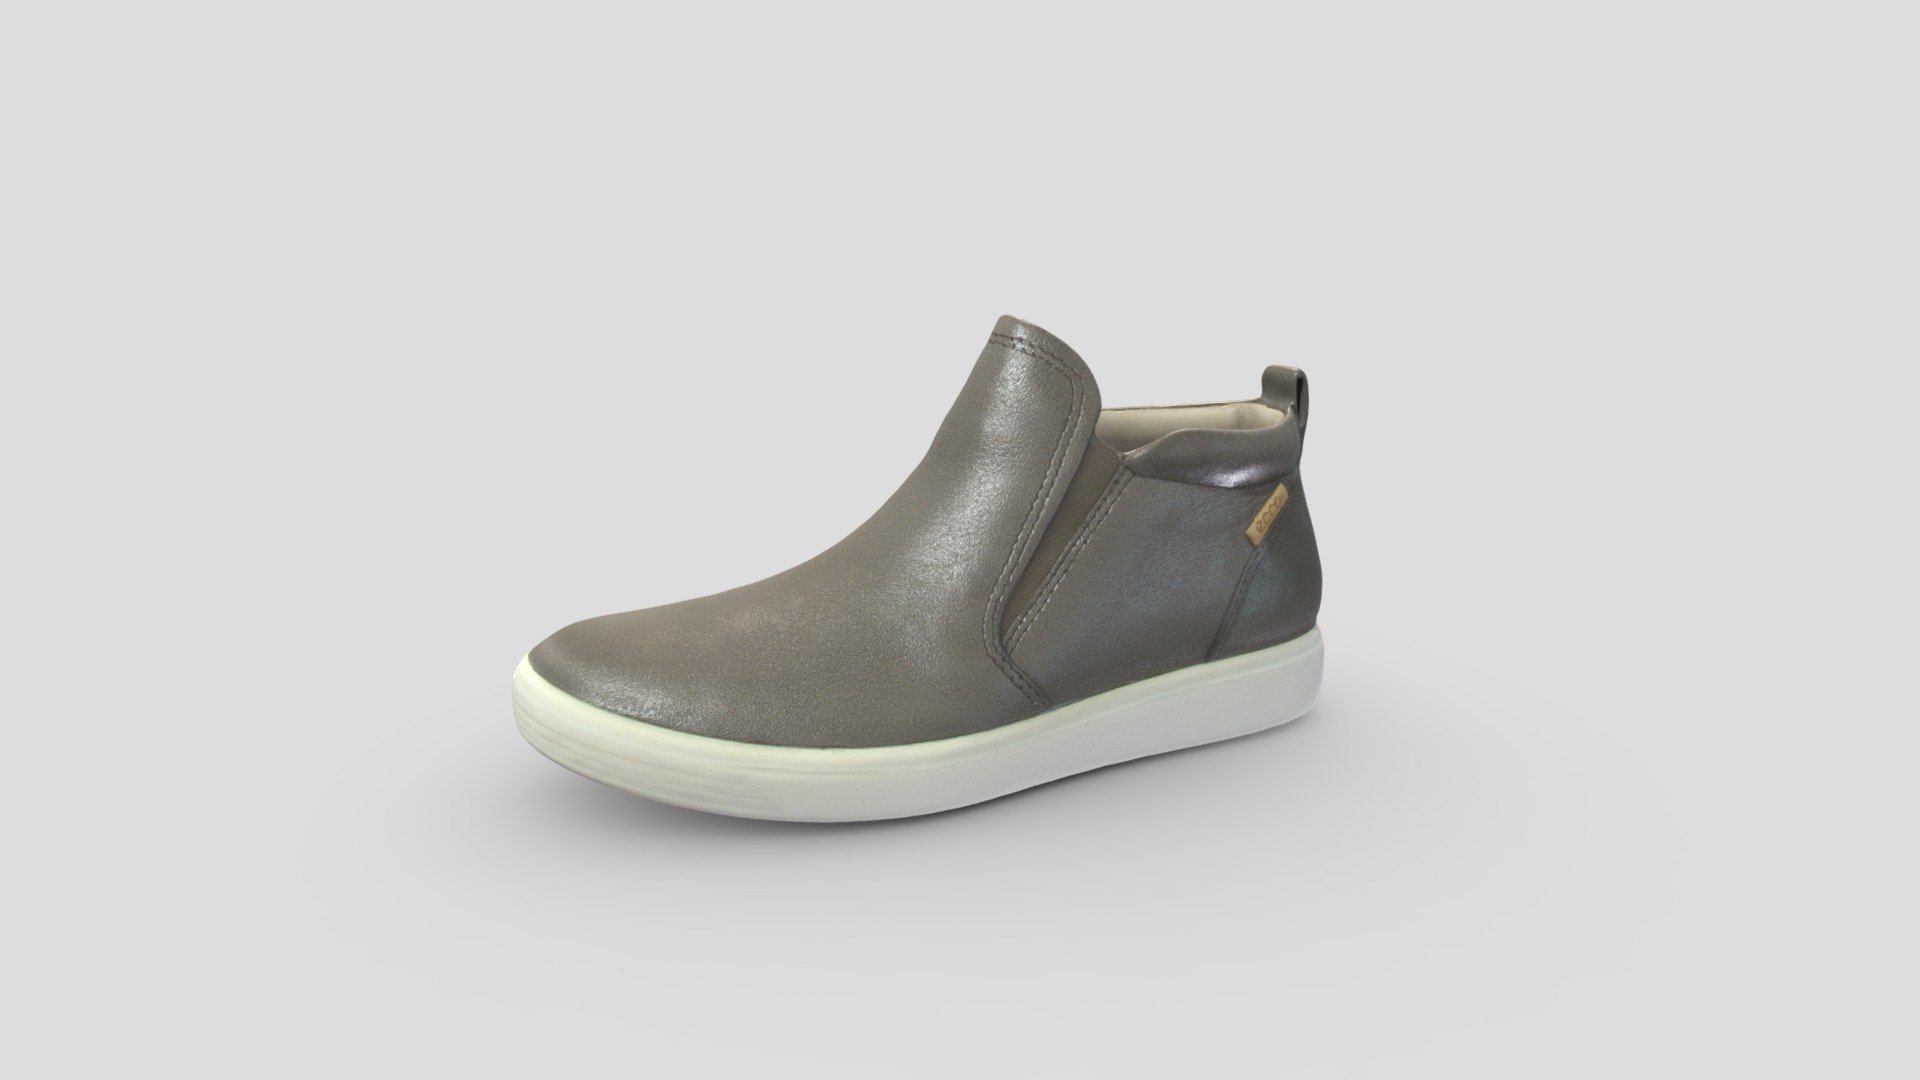 Check out this high quality low-poly 3D model of Ecco Shoes.

For your 3D modelling requirements, connect with us at info@shinobu3d.com.

We offer premium quality low poly 3D assets/models for AR/VR applications, 3D visualisations, 3D product configurators, 3D printing &amp; 3D animations.

Visit https://www.shinobu3d.com for more on us 3d model